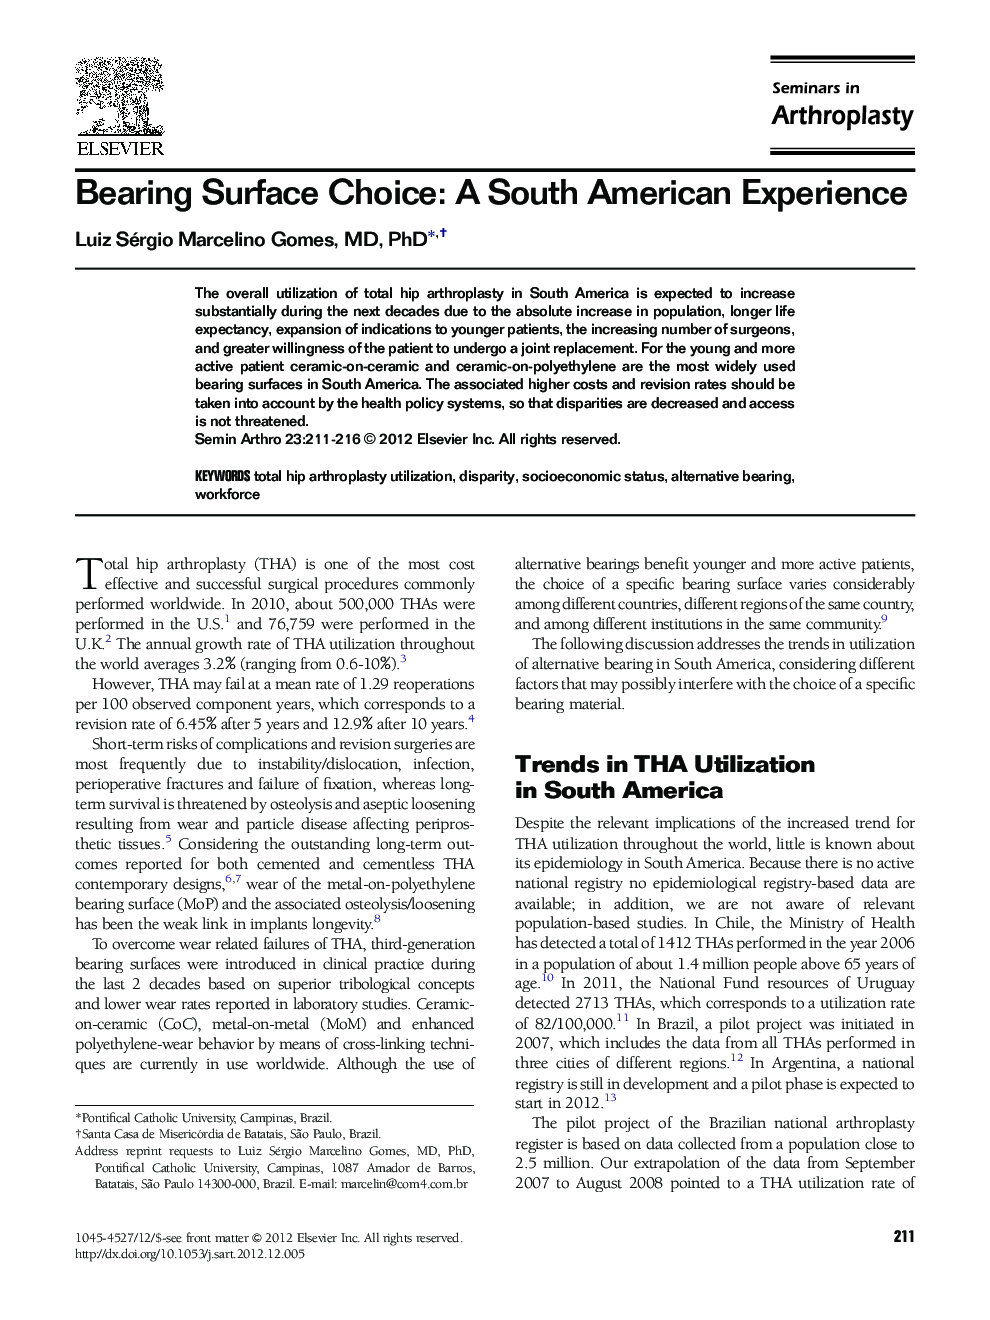 Bearing Surface Choice: A South American Experience